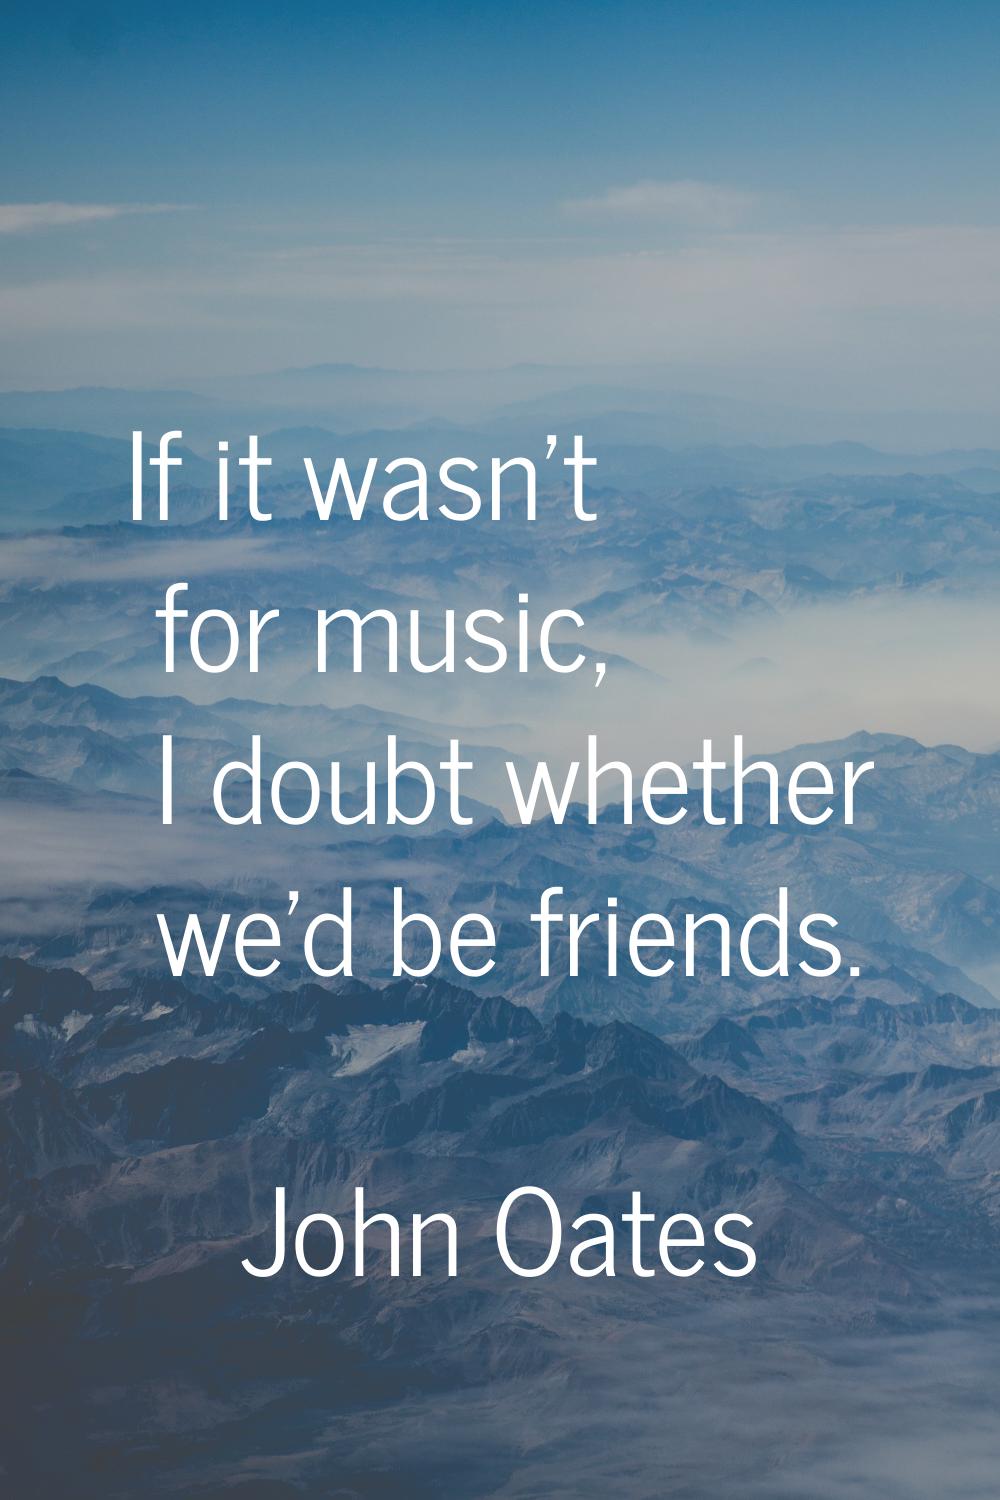 If it wasn't for music, I doubt whether we'd be friends.